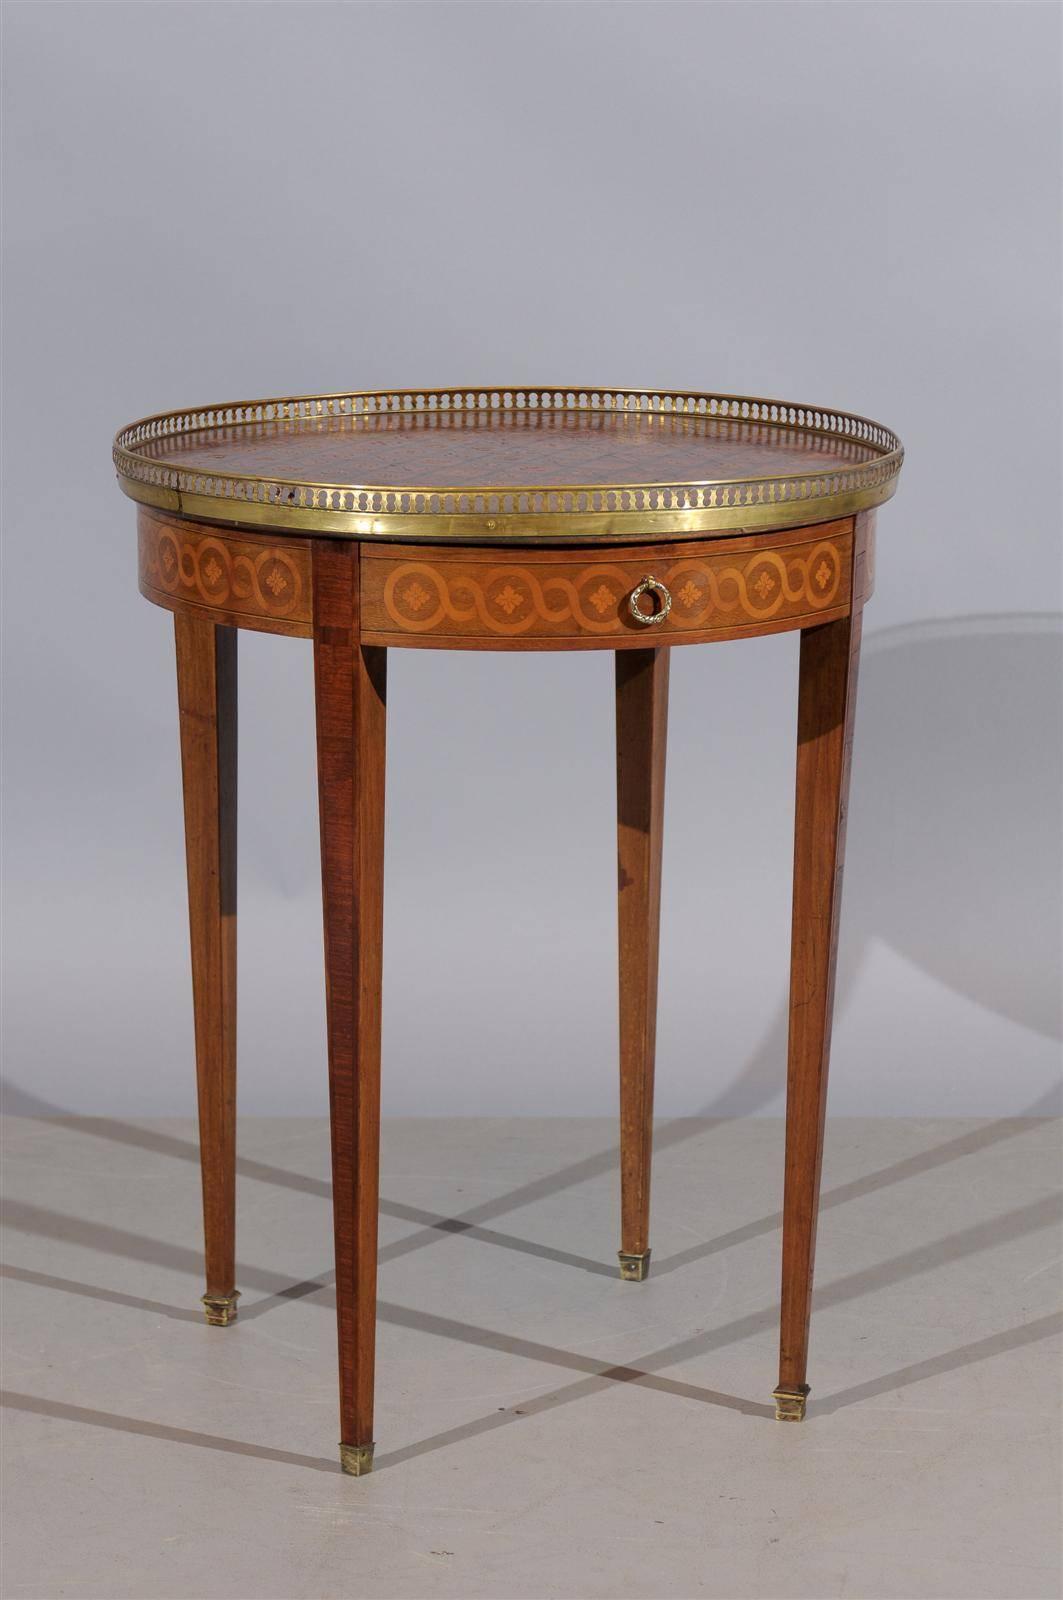 A Louis XVI style parquetry Inlaid Bouillotte table with brass gallery, drawer and tapered legs. 

To view our entire inventory, please visit our website.

William Word Fine Antiques: Atlanta's source for antique interiors since 1956.